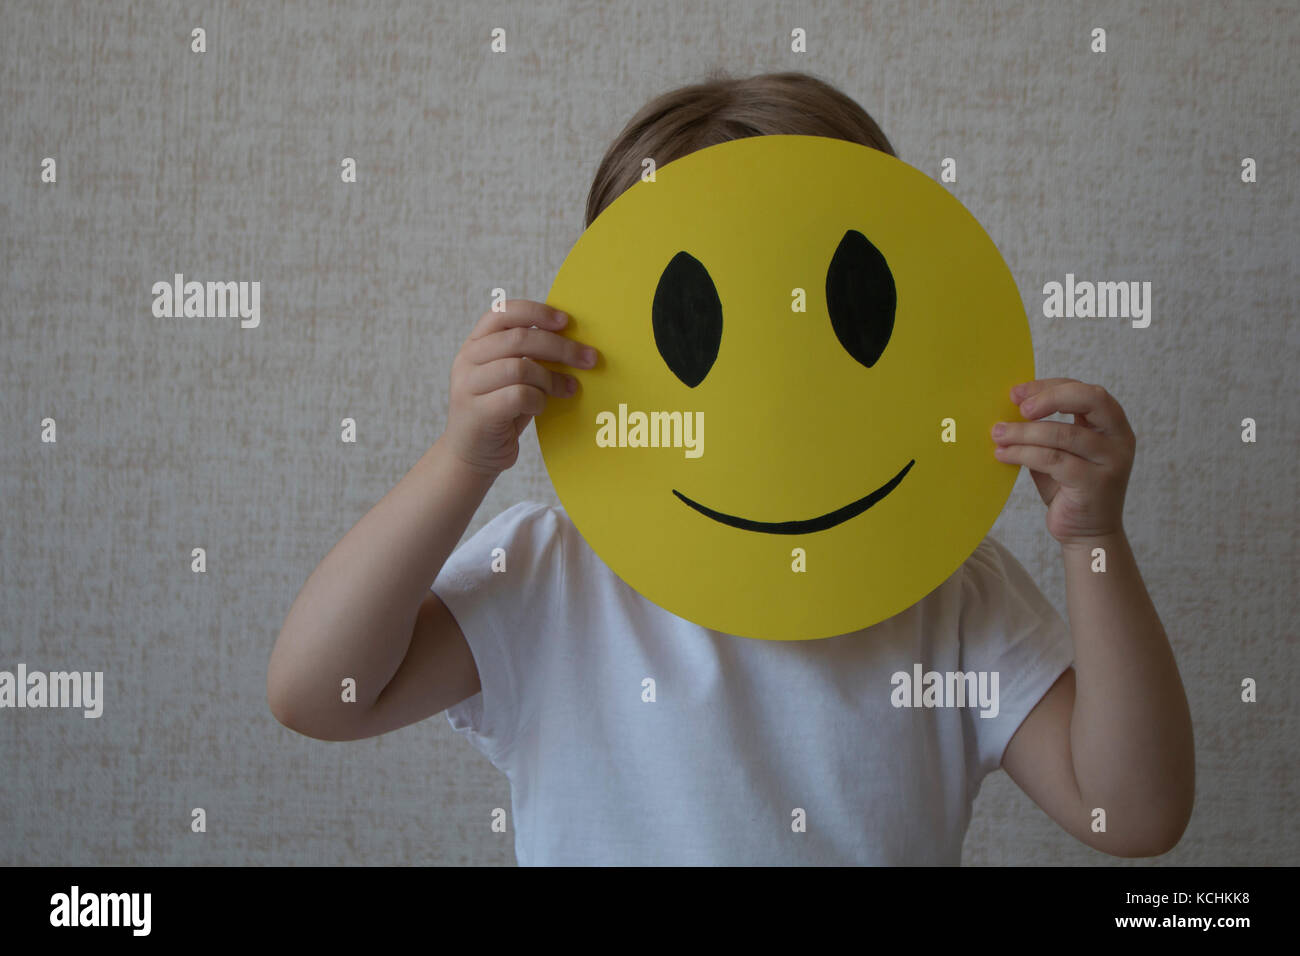 A kid holding a yellow circle with smile face emoticon instead of head. Stock Photo